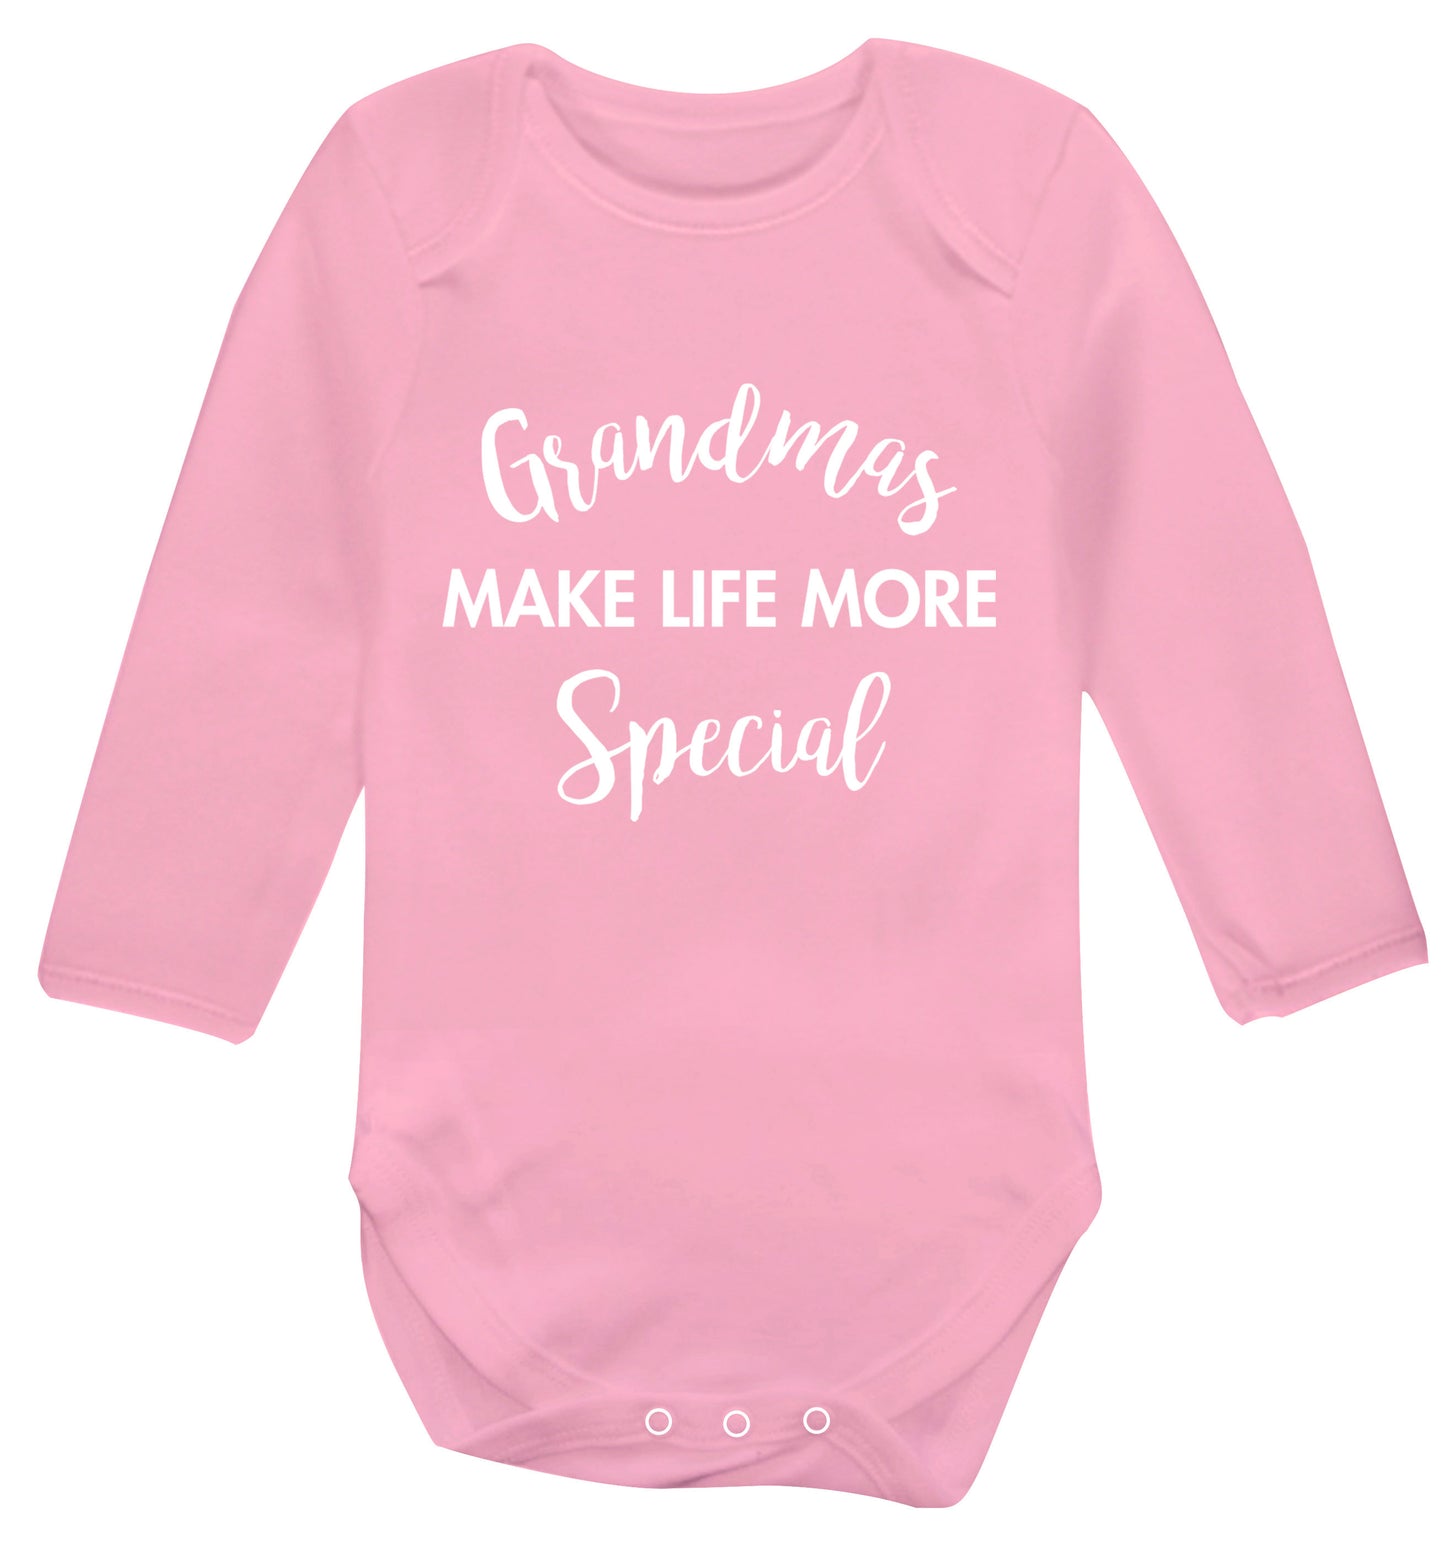 Grandmas make life more special Baby Vest long sleeved pale pink 6-12 months